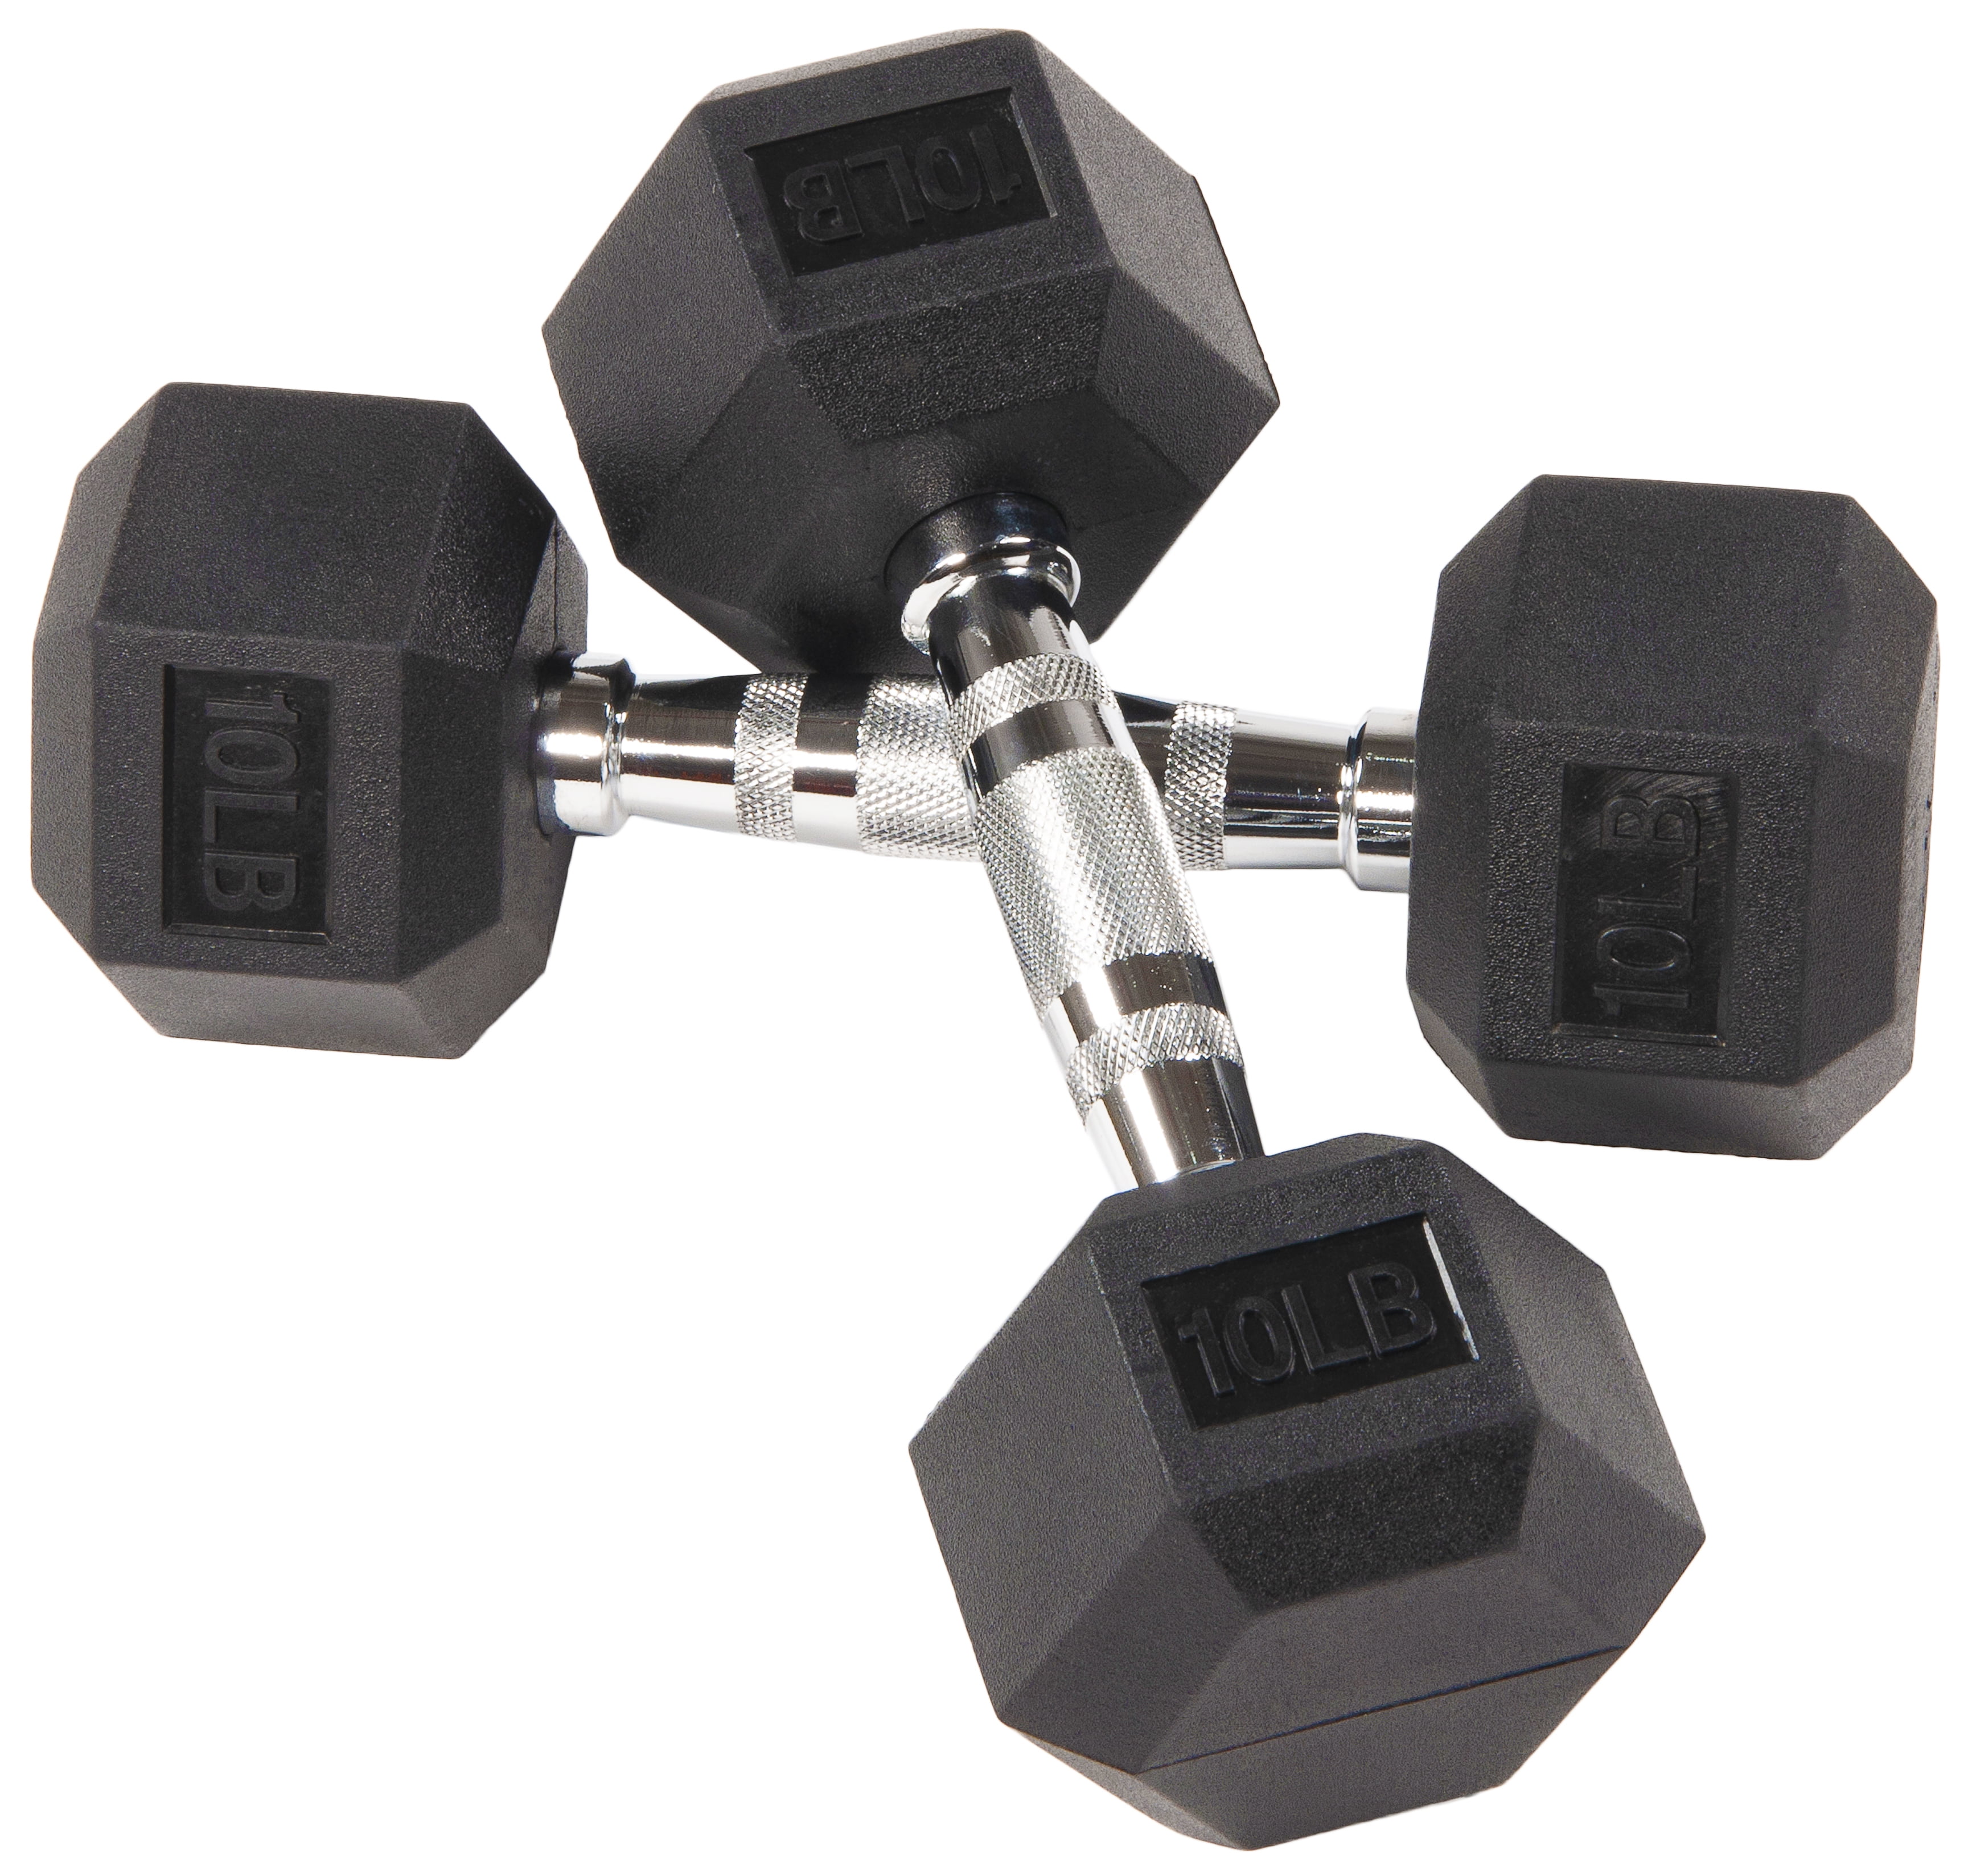 Rubber Coated Hex BRAND NEW✅ 15 LB Dumbbells Pair Set of 2 30 POUNDS TOTAL 